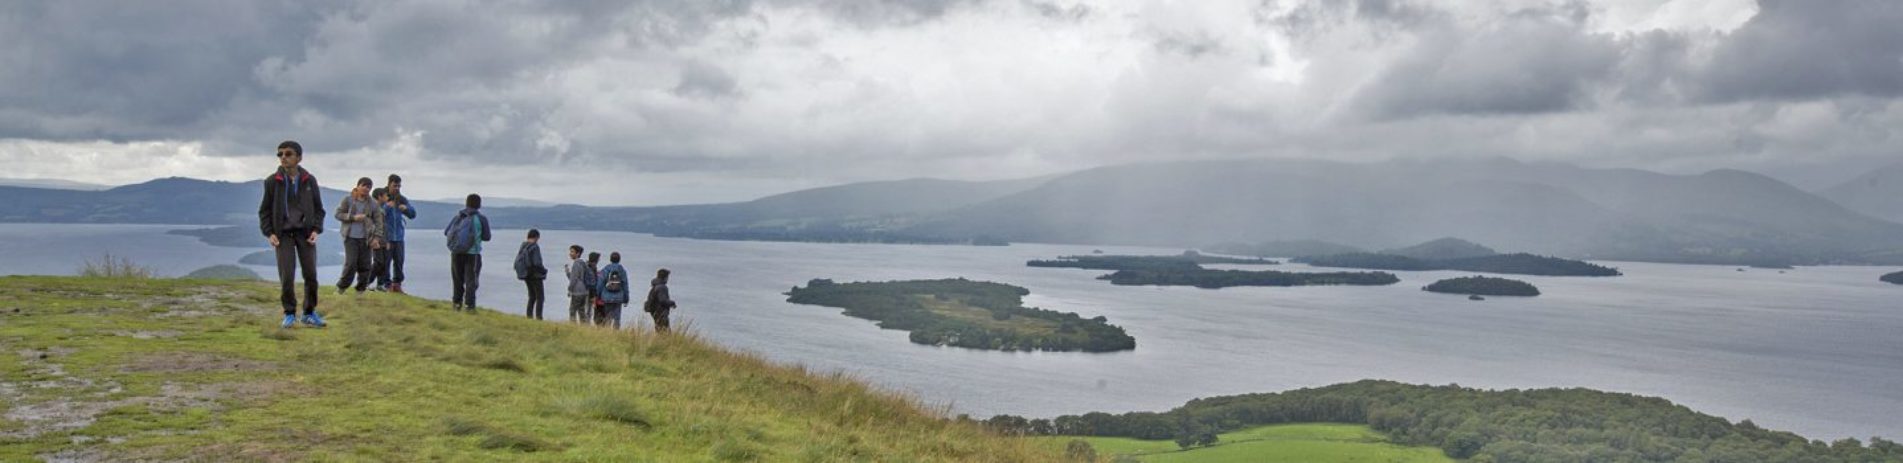 group-of-young-male-students-climbing-slopes-of-conic-hill-with-loch-lomond-and-islands-in-the-distance